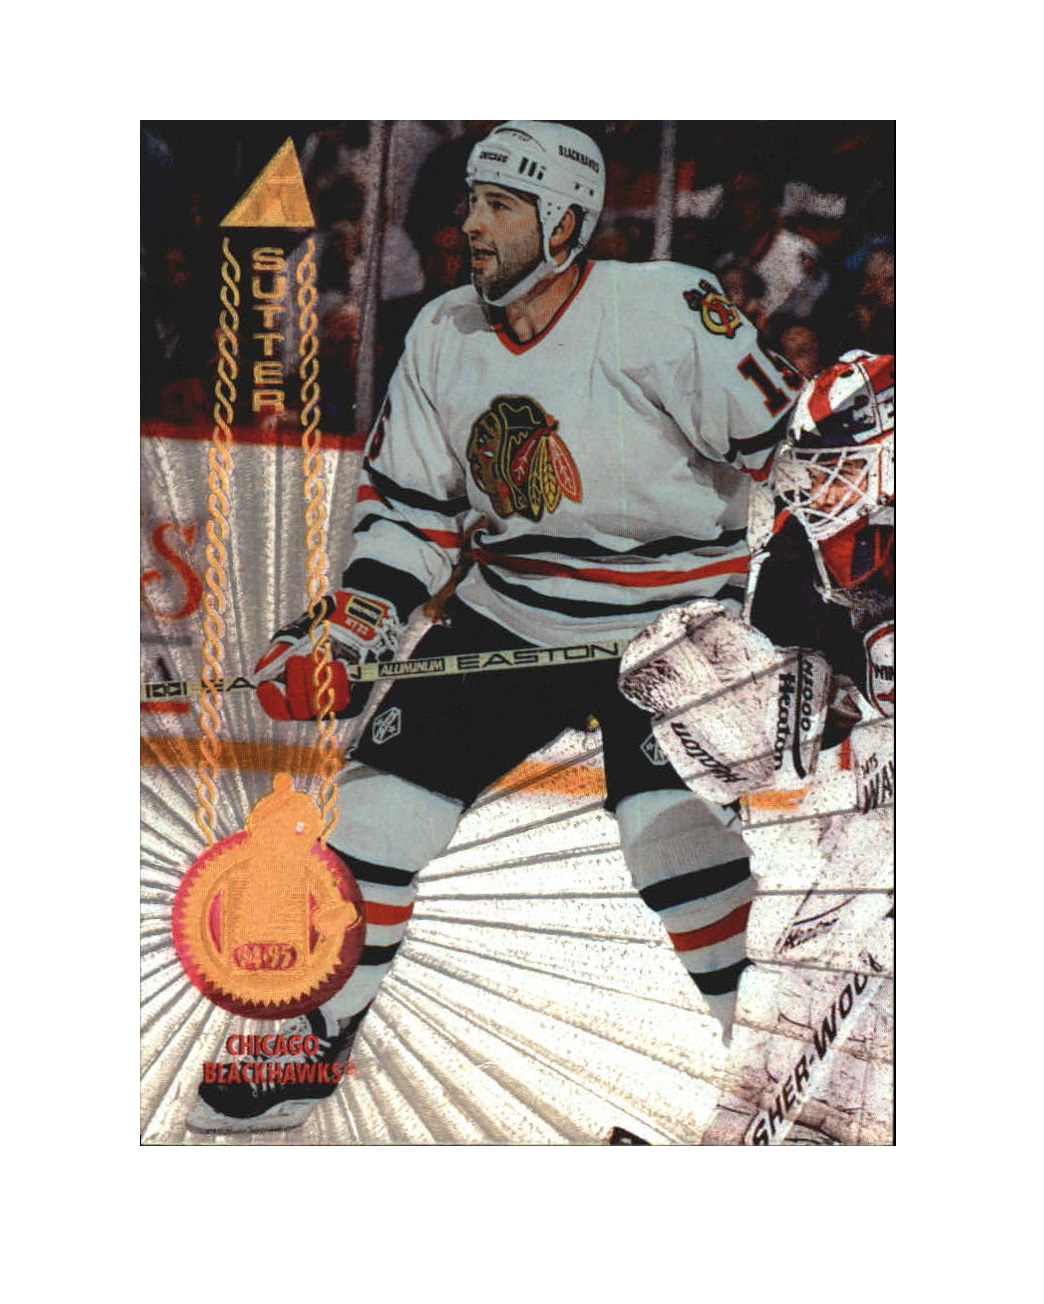 1994-95 Pinnacle Rink Collection #235 Rich Sutter (10-X247-BLACKHAWKS)